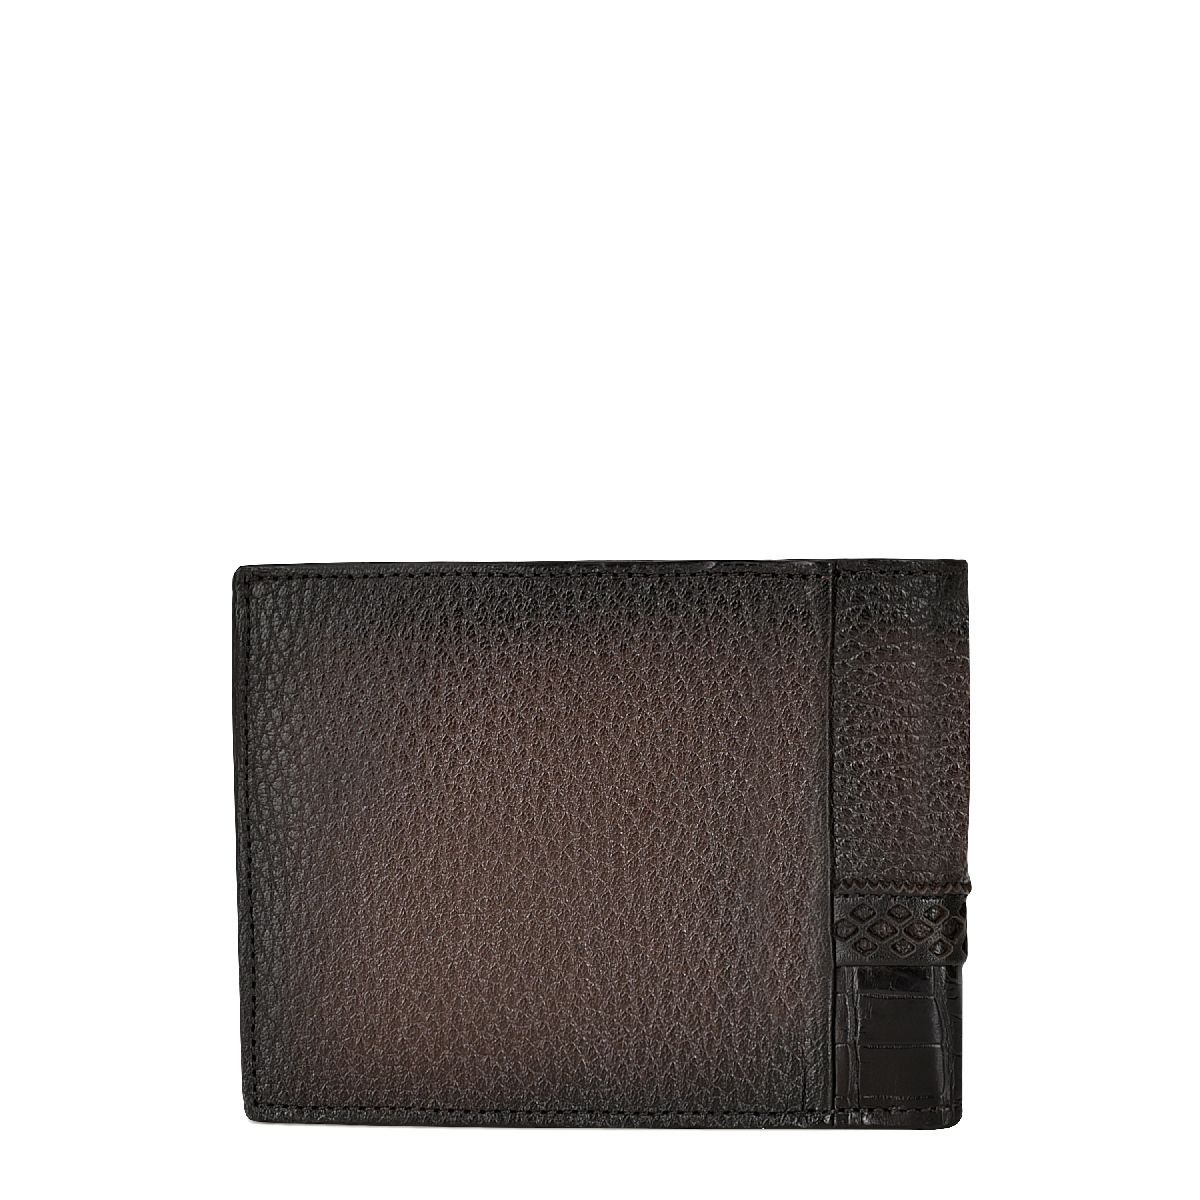 BC012NL - Cuadra Black Exotic Bifold Wallet in Niloticus Leather for Men